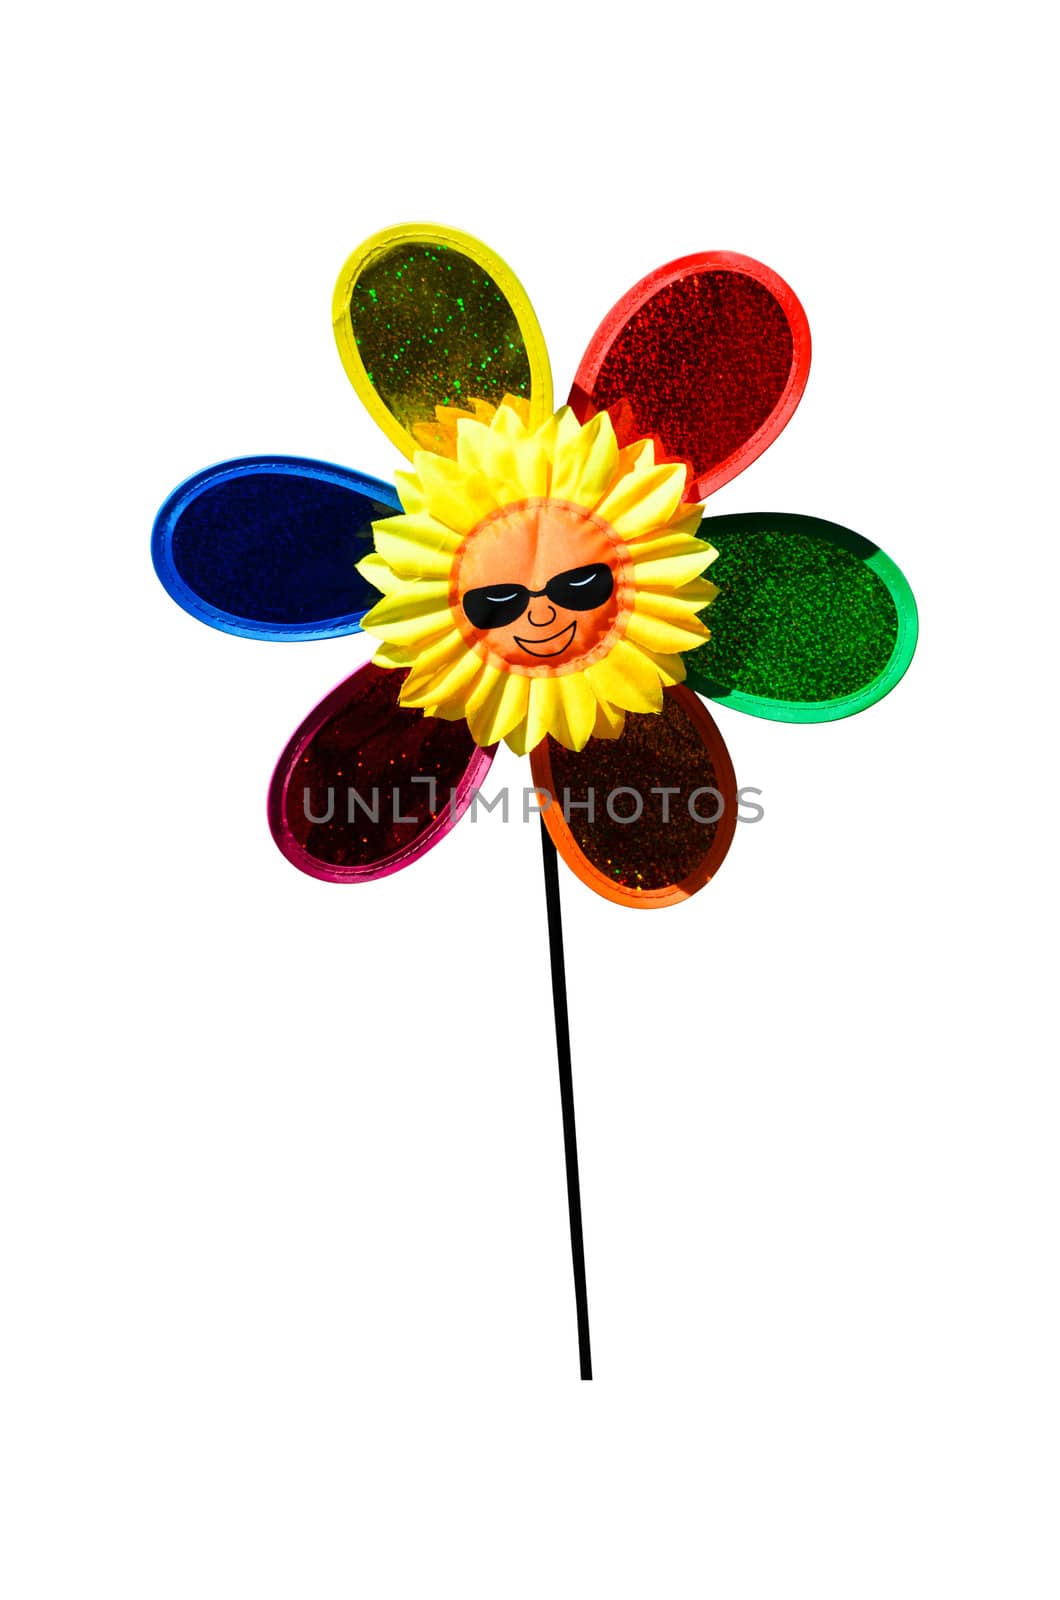 Artificial Sunflower on white background.